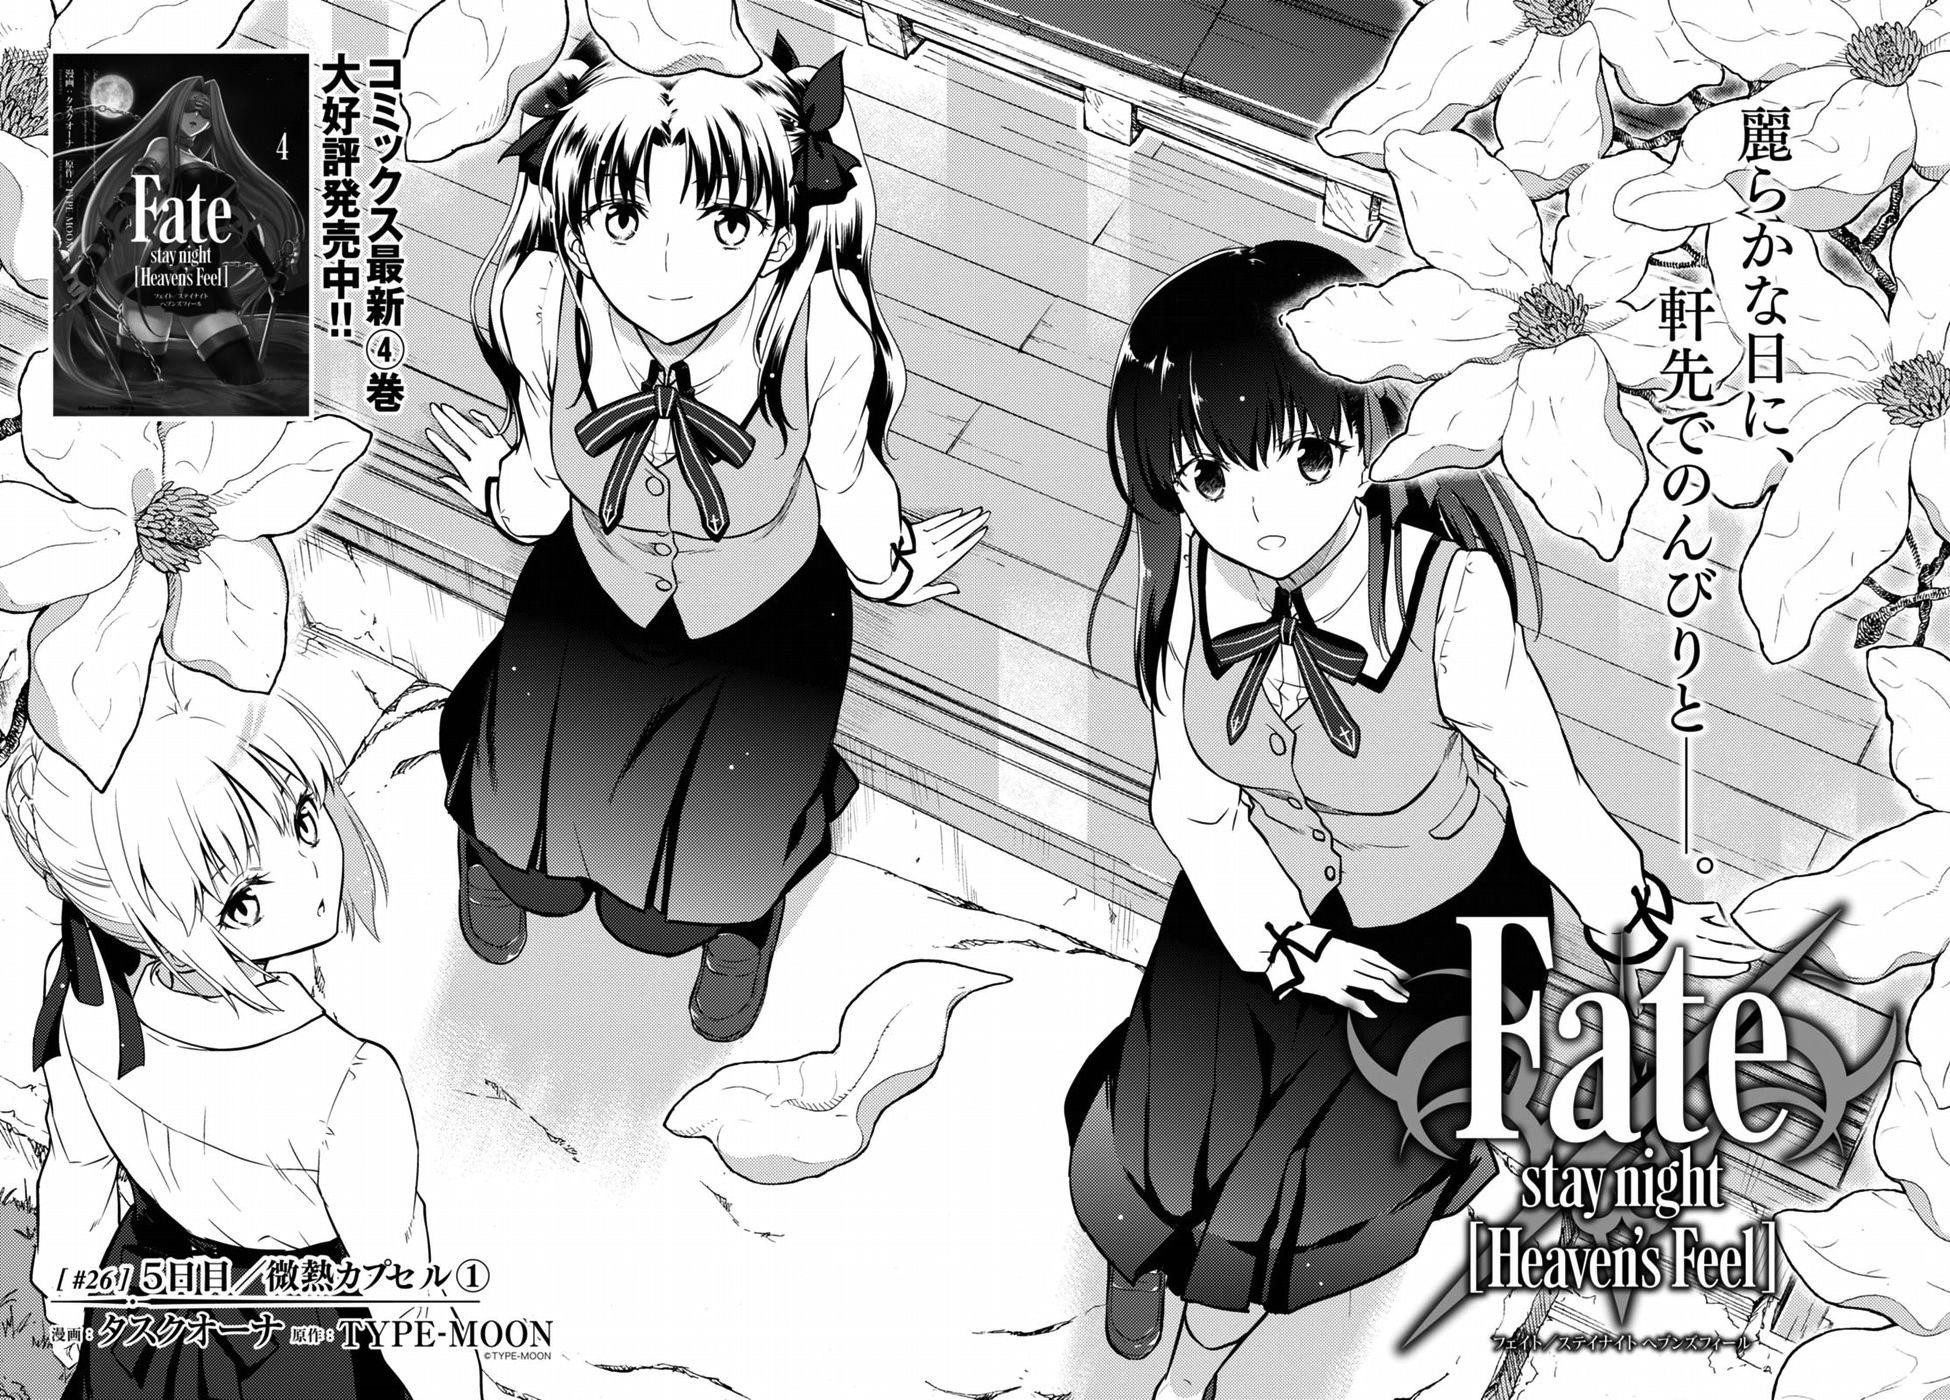 Fate/Stay night Heaven's Feel - Chapter 26 - Page 2